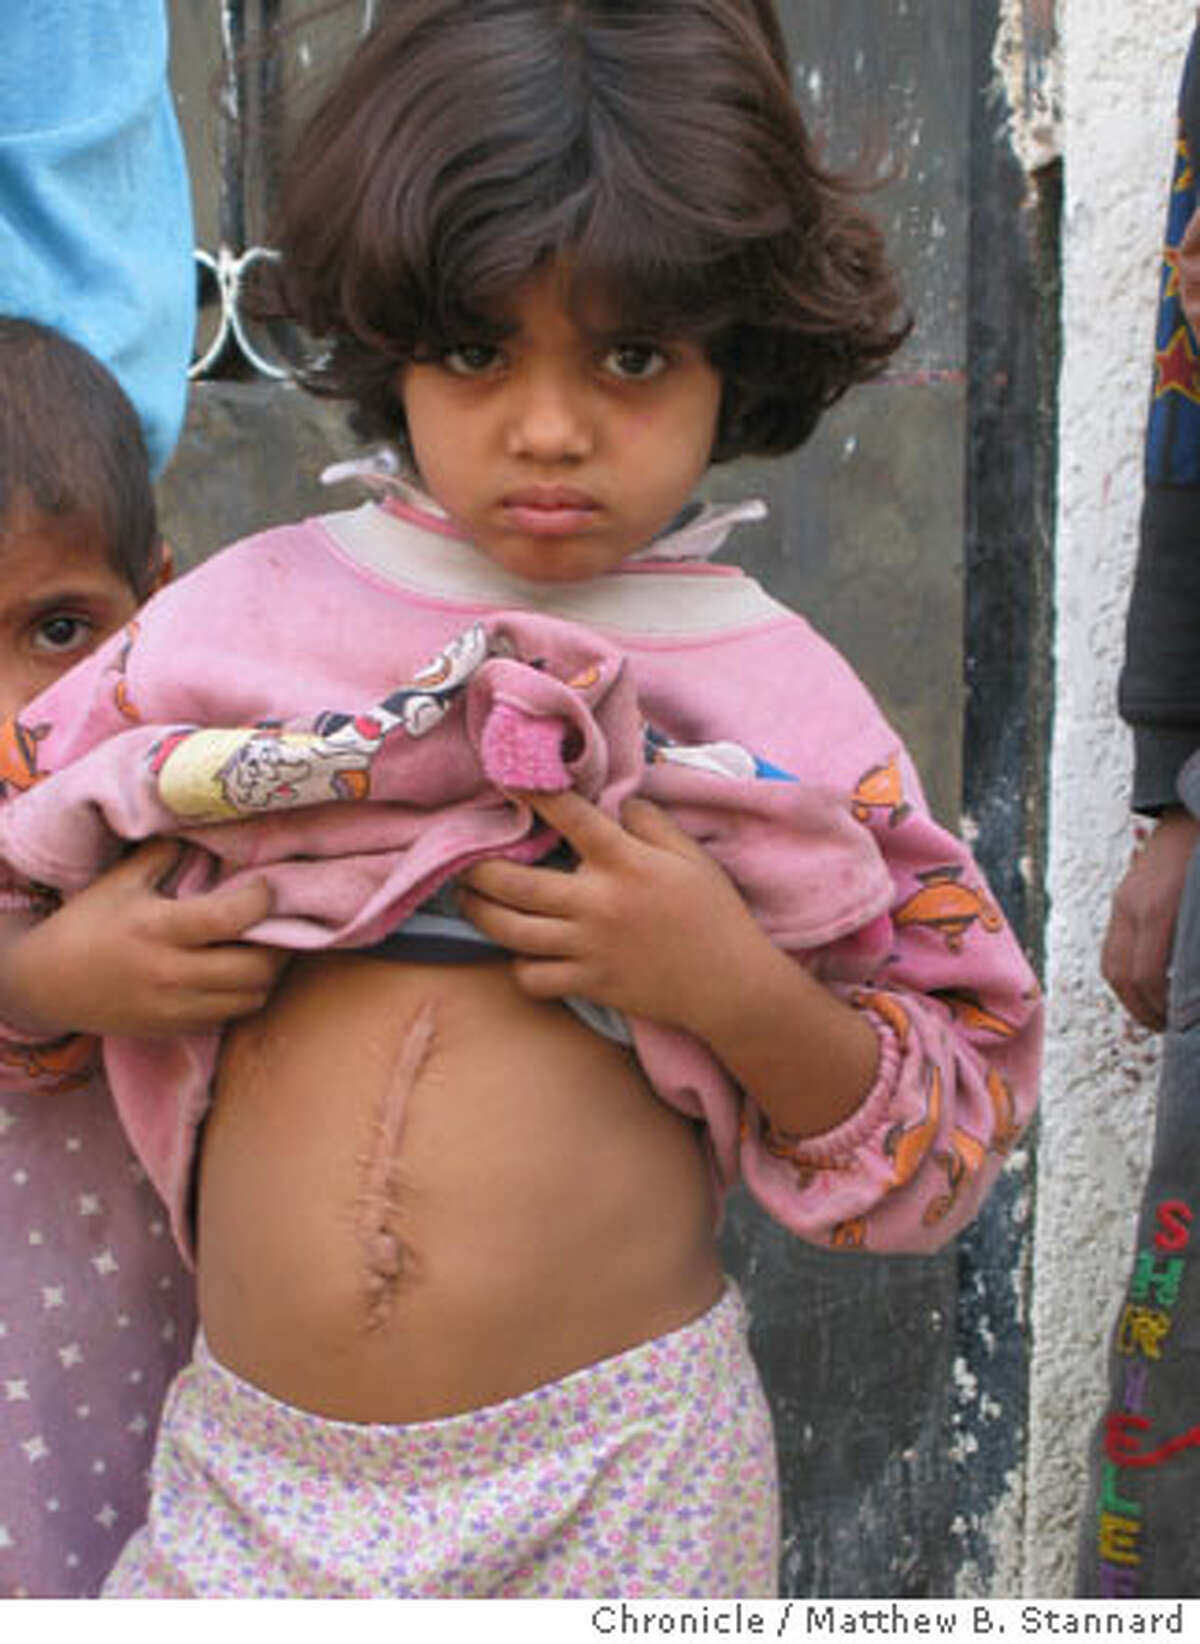 Fatima Edan, 5, shows a thick scar on her belly -- a reminder of an injury from the war. Chronicle photo by Matthew B. Stannard